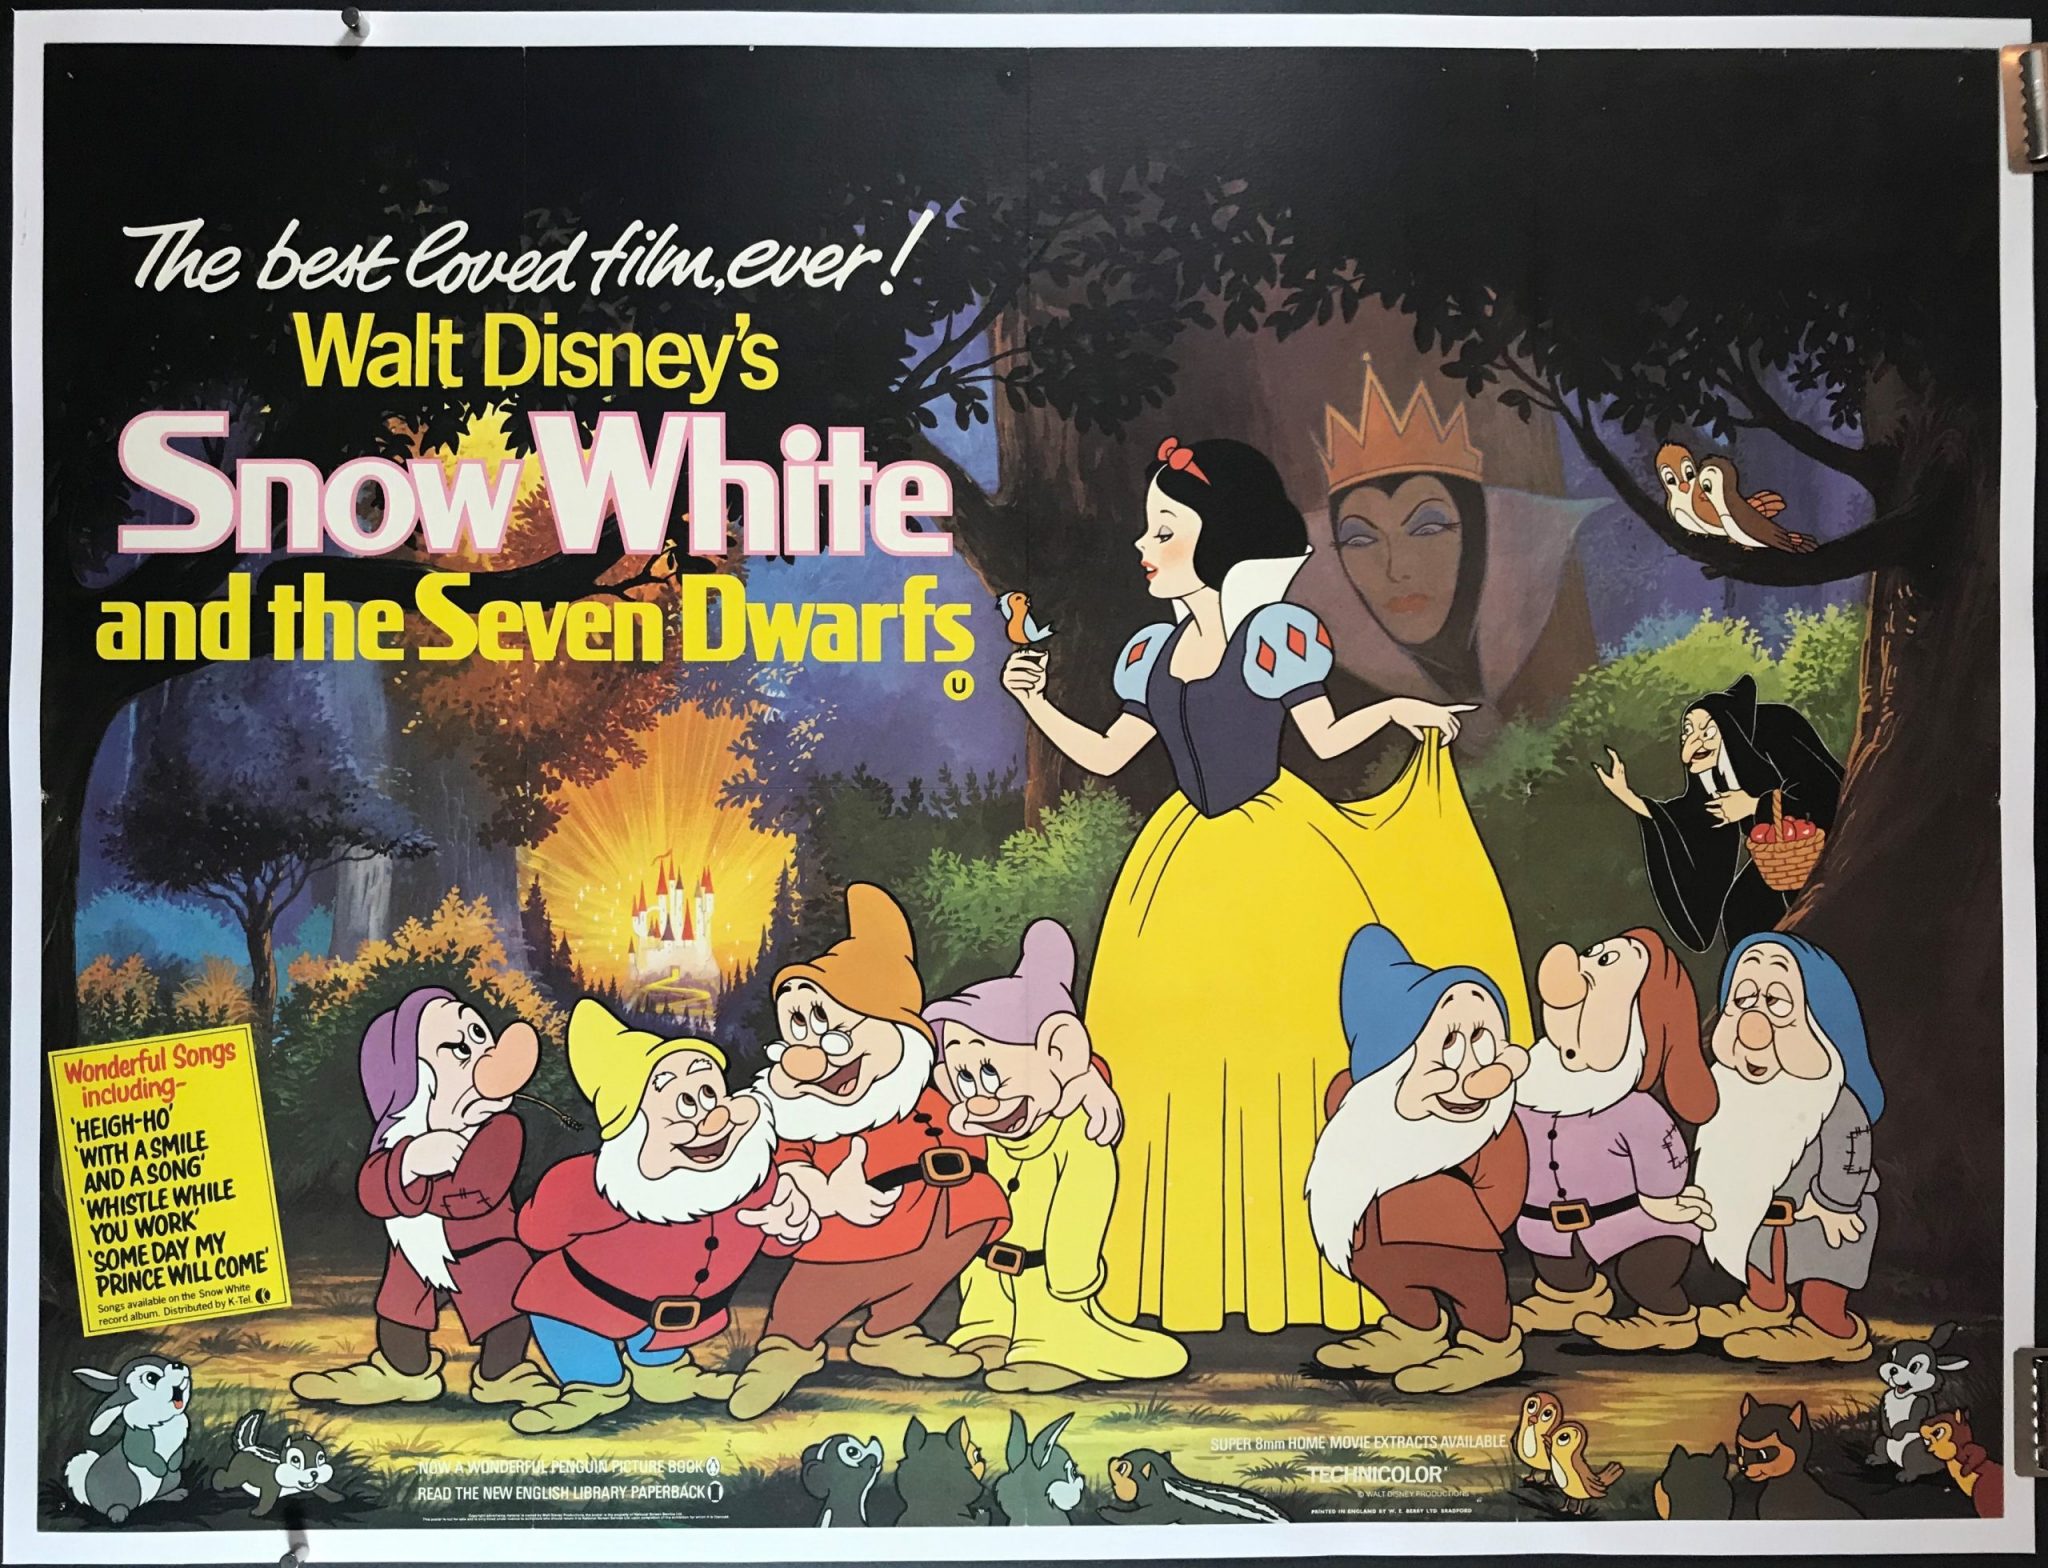 Snow white and the seven dwarfs, 1937. 